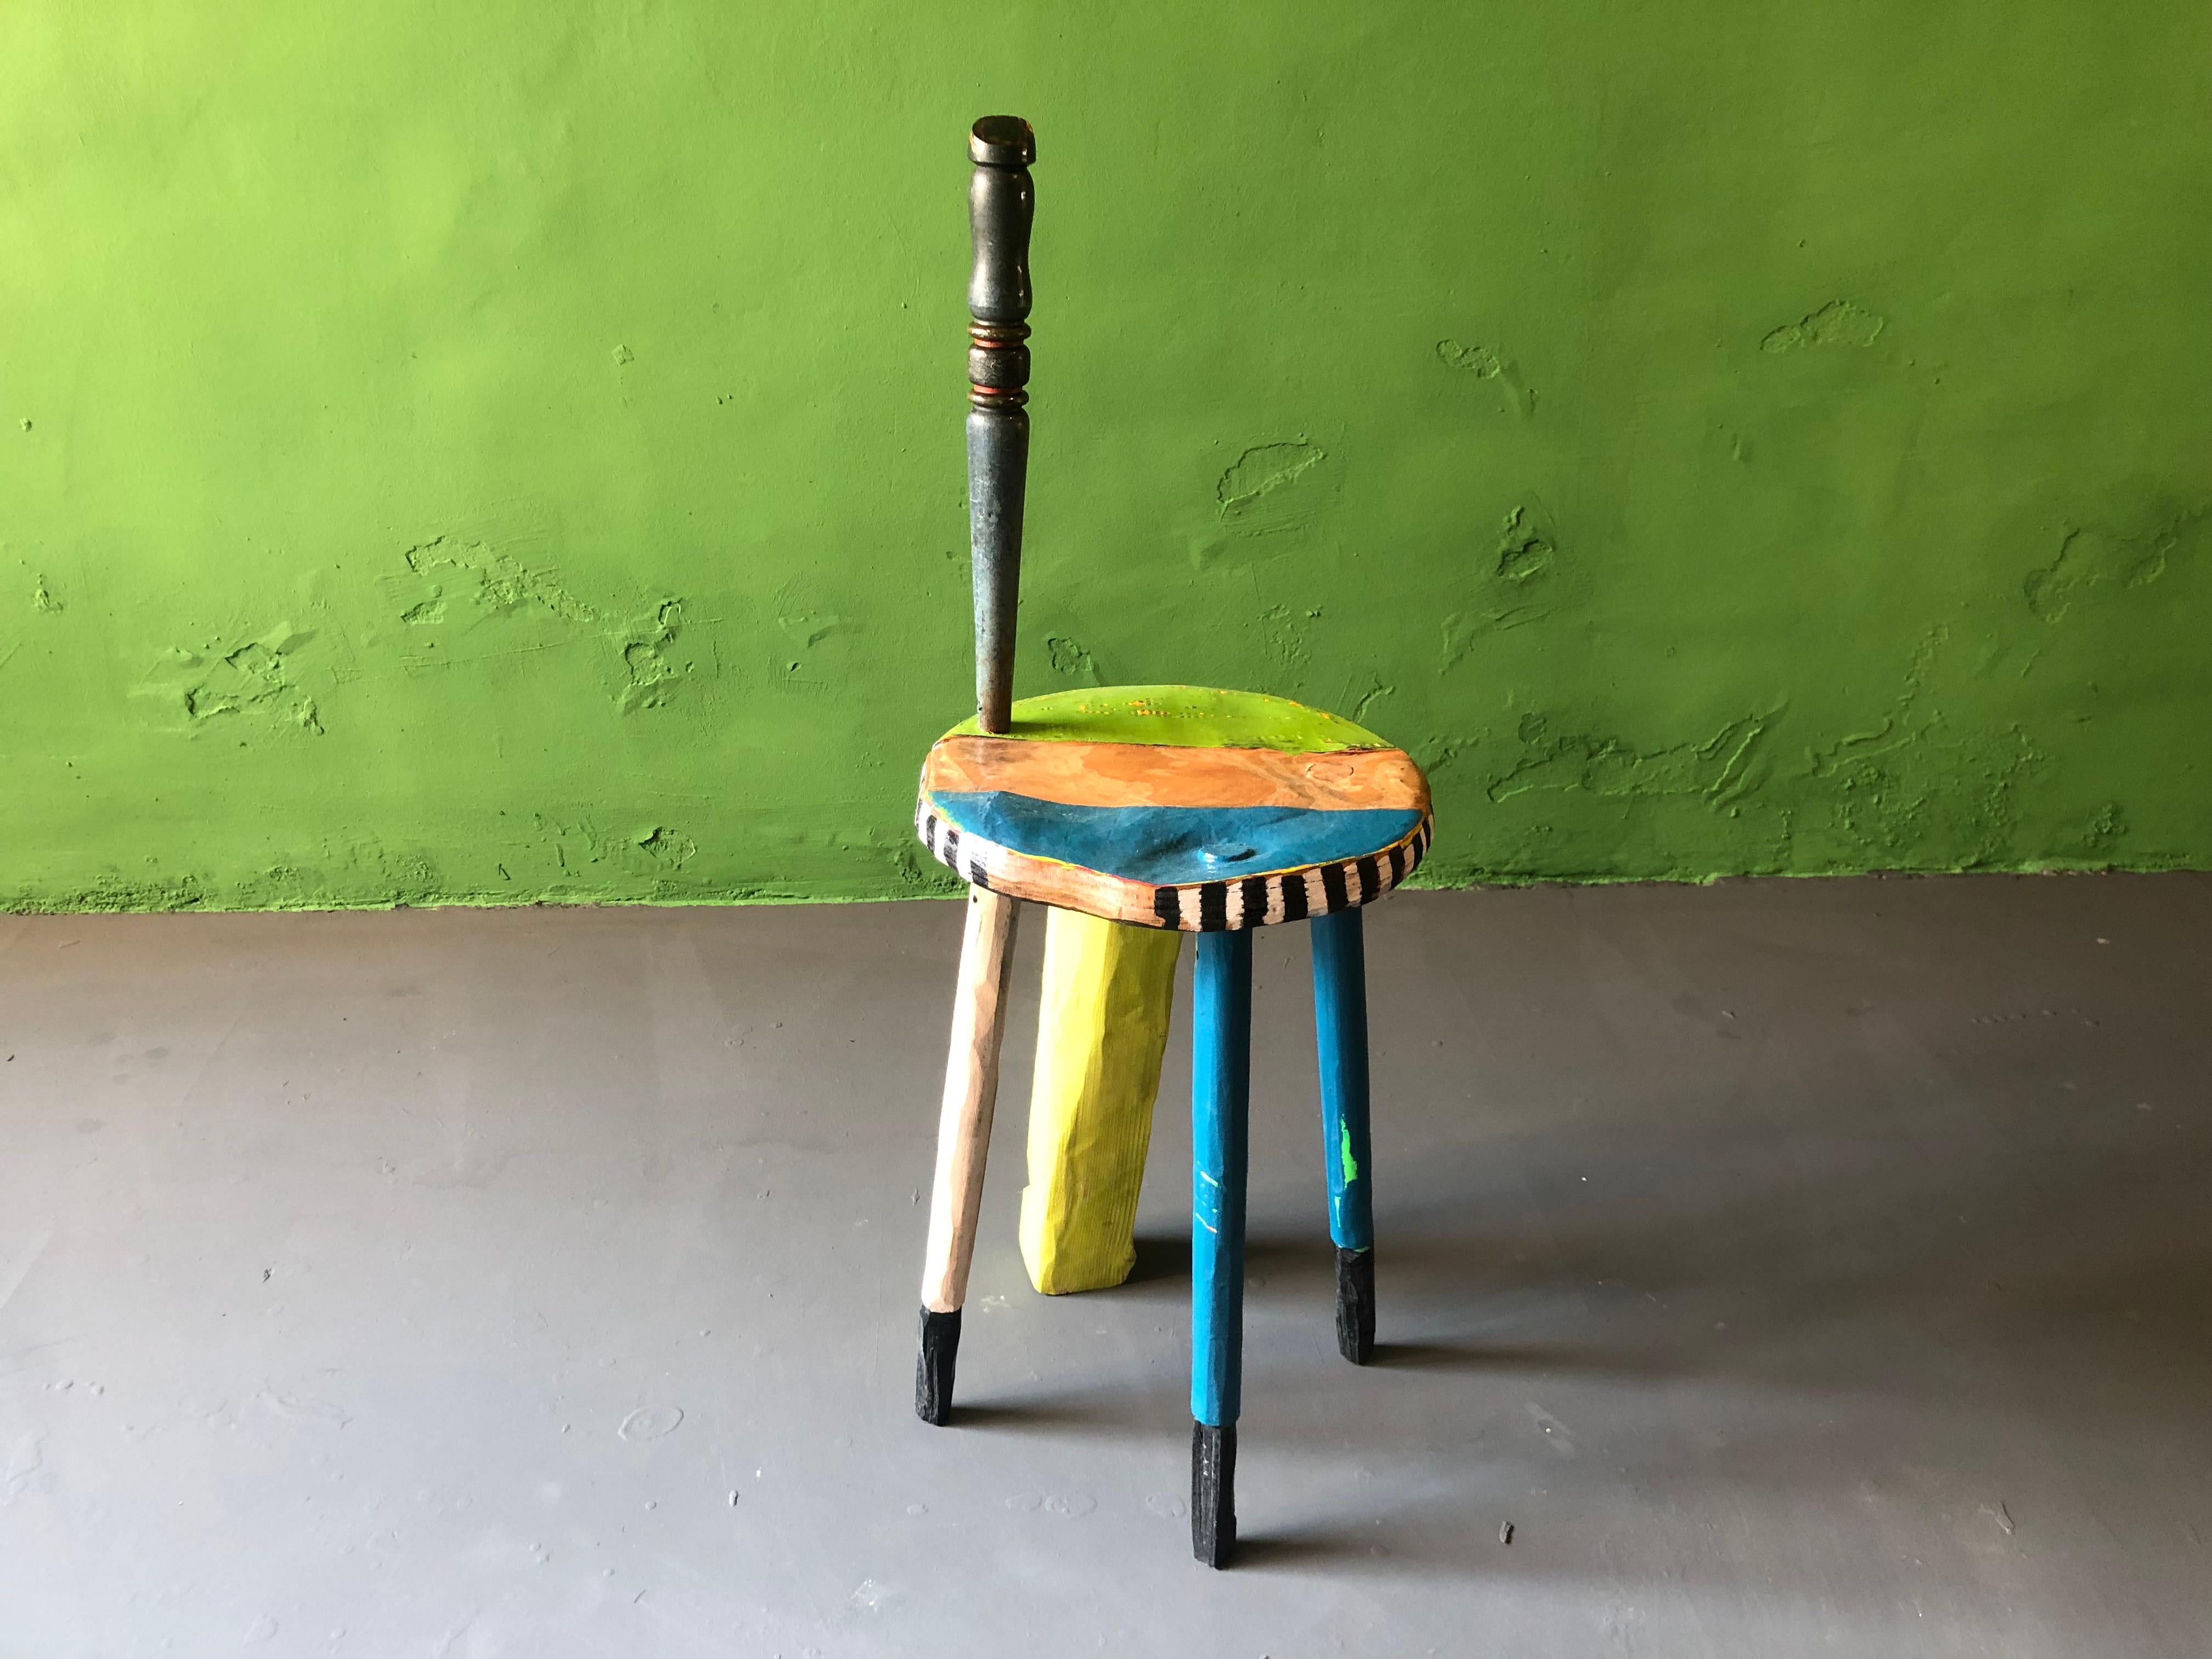 1940's work stool contemporized, additionel sculptural leg, hand grip, painted and multi lacquered.
Through my work I transform each chair into a unique and individual object. Chairs that once were mass-produced and homogenous, become singular and